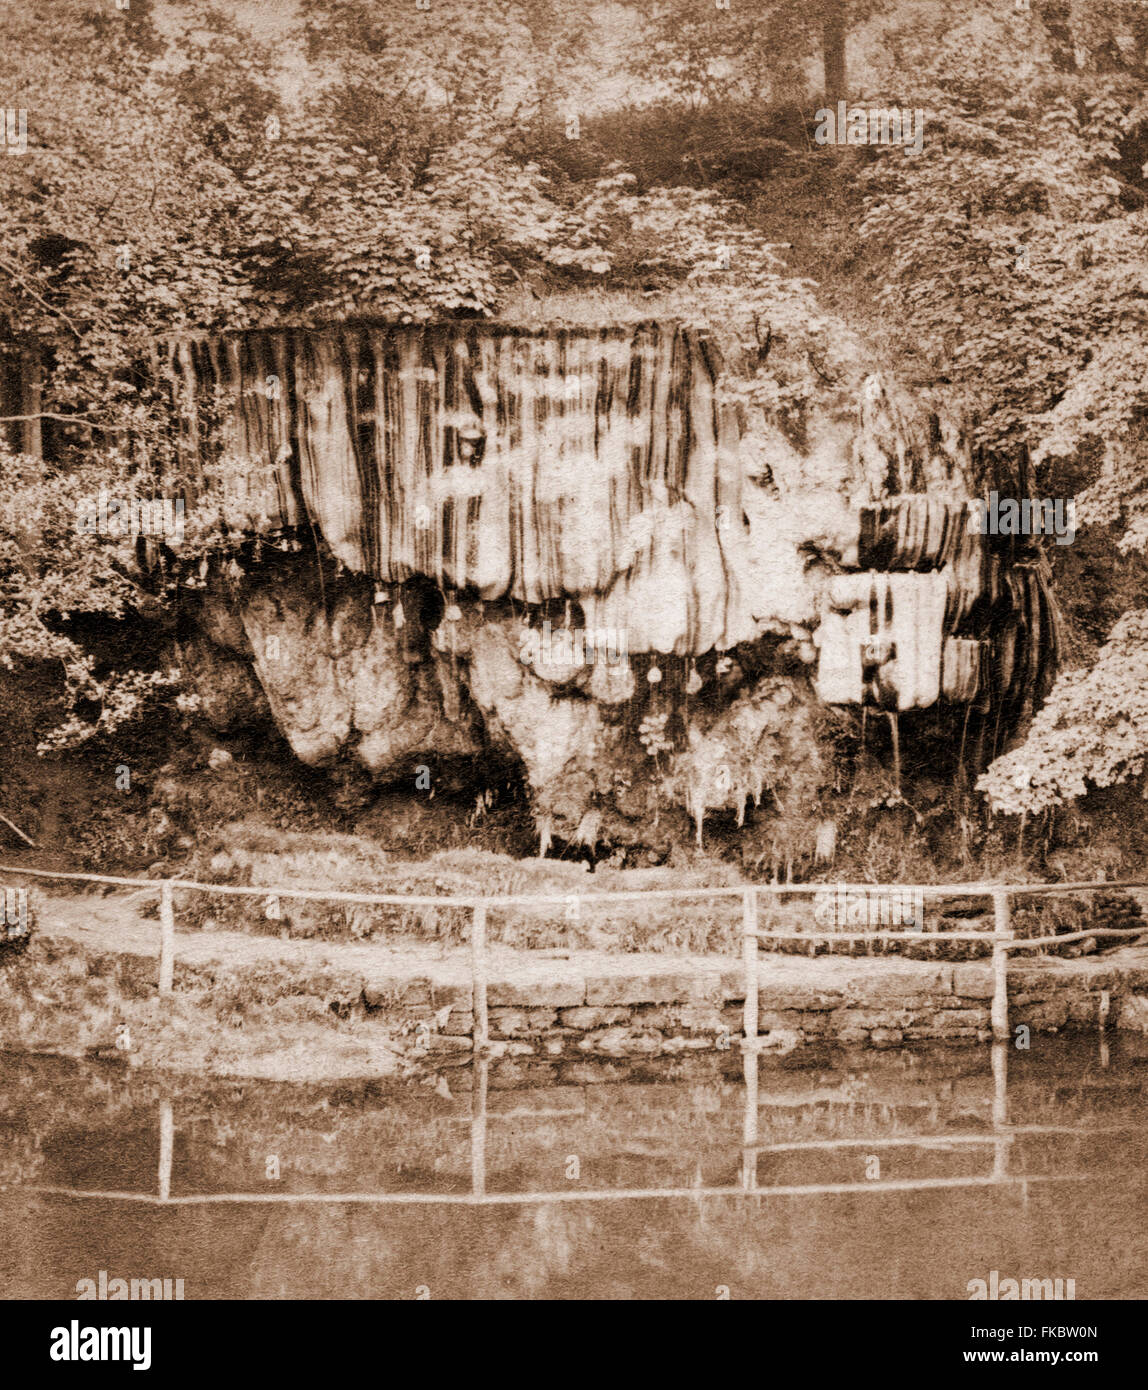 Dropping Well, Knaresborough, Yorkshire, note the objects hung up to be calcified in the highly mineralised flow of water Stock Photo